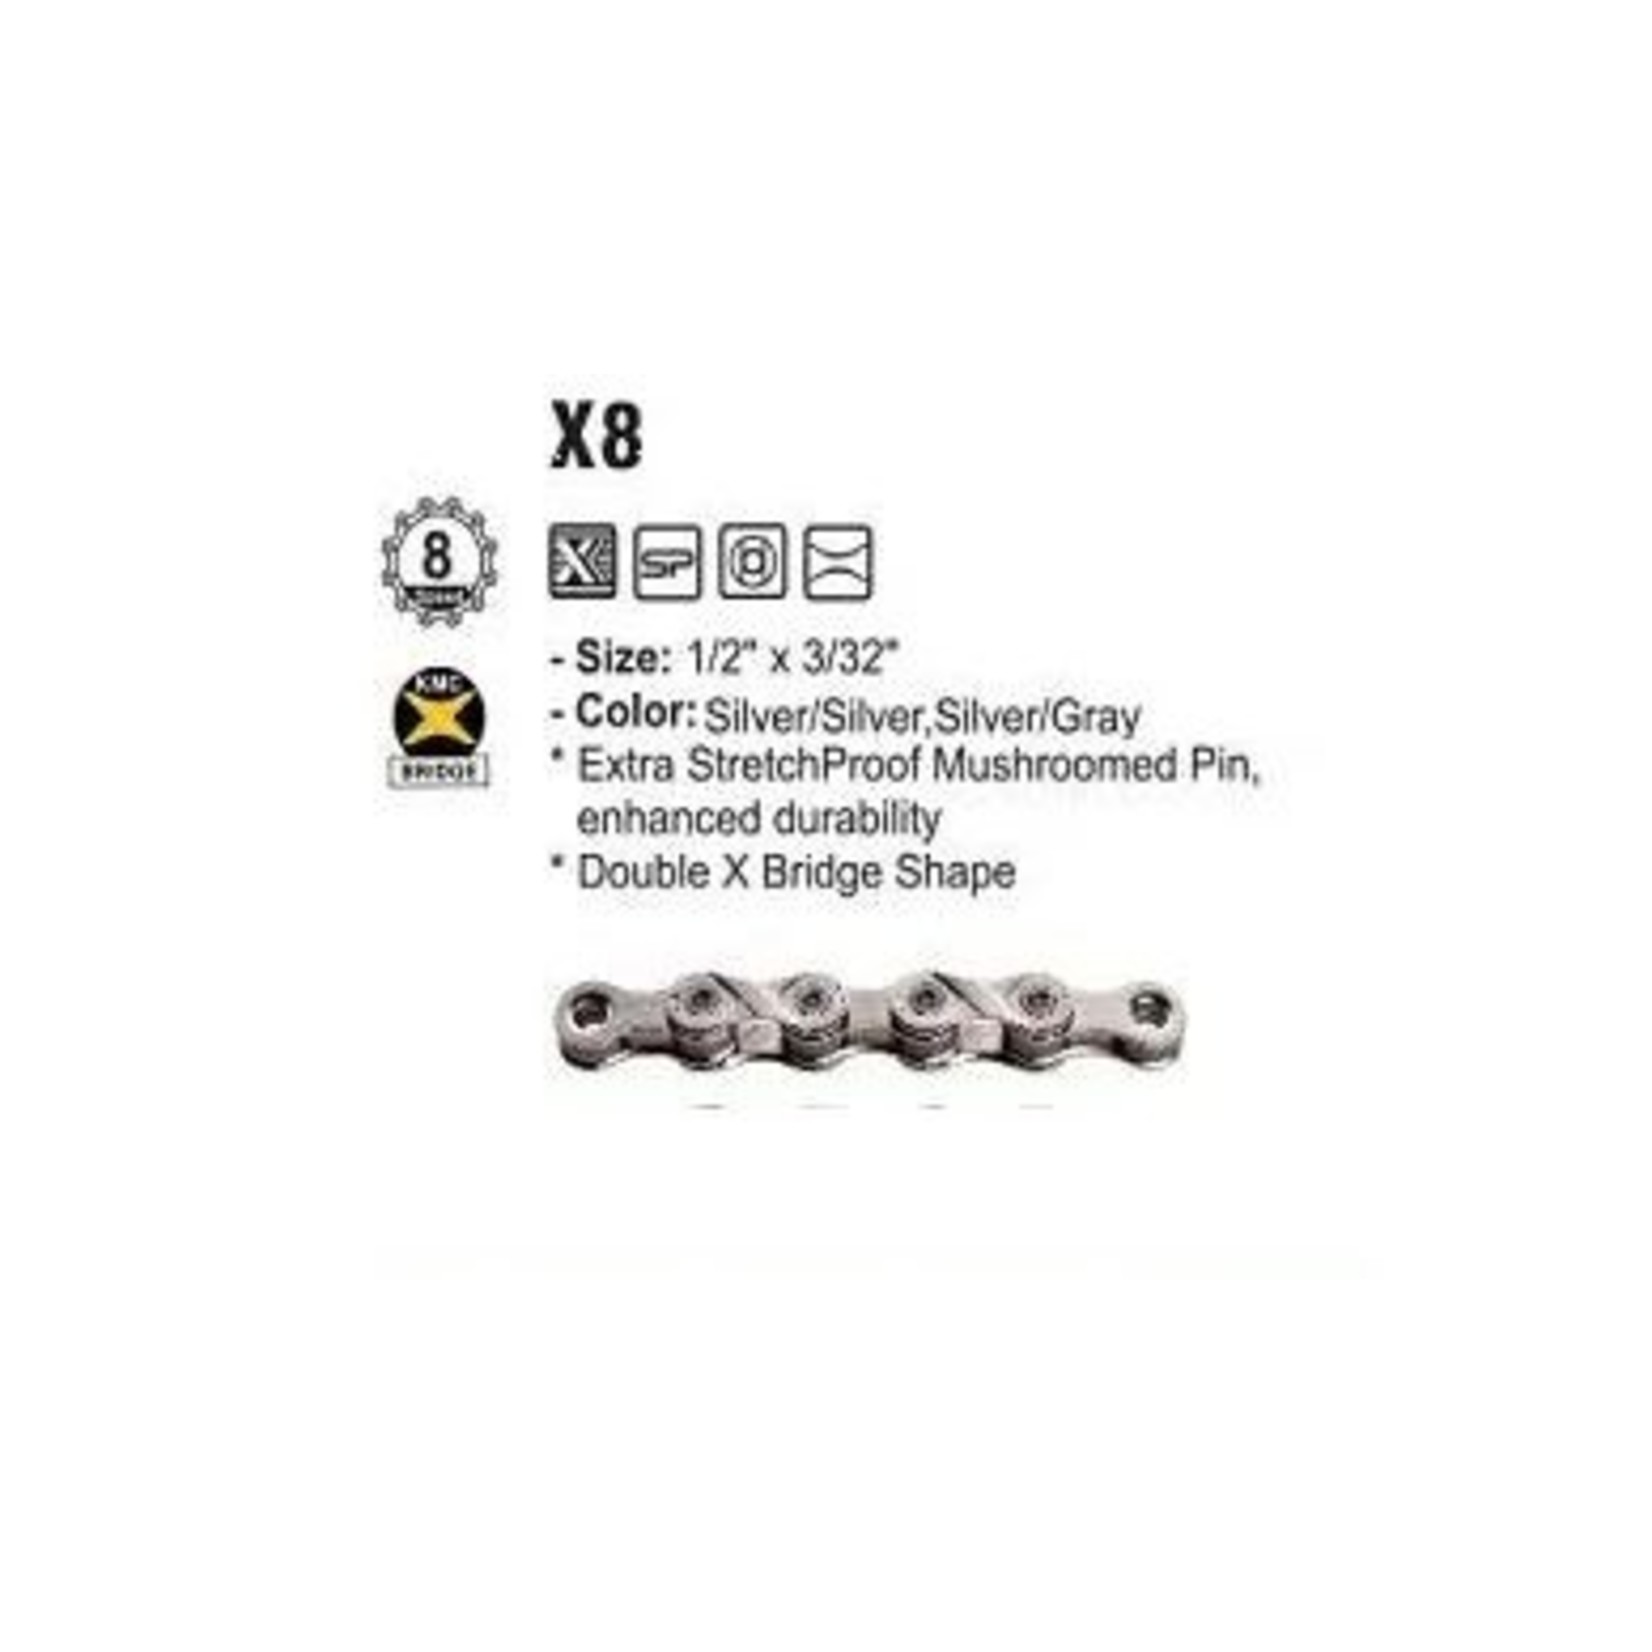 KMC KMC Bike Chain - X8 - 1/2" X 3/32" X 116 Links With Connector - Silver/Silver